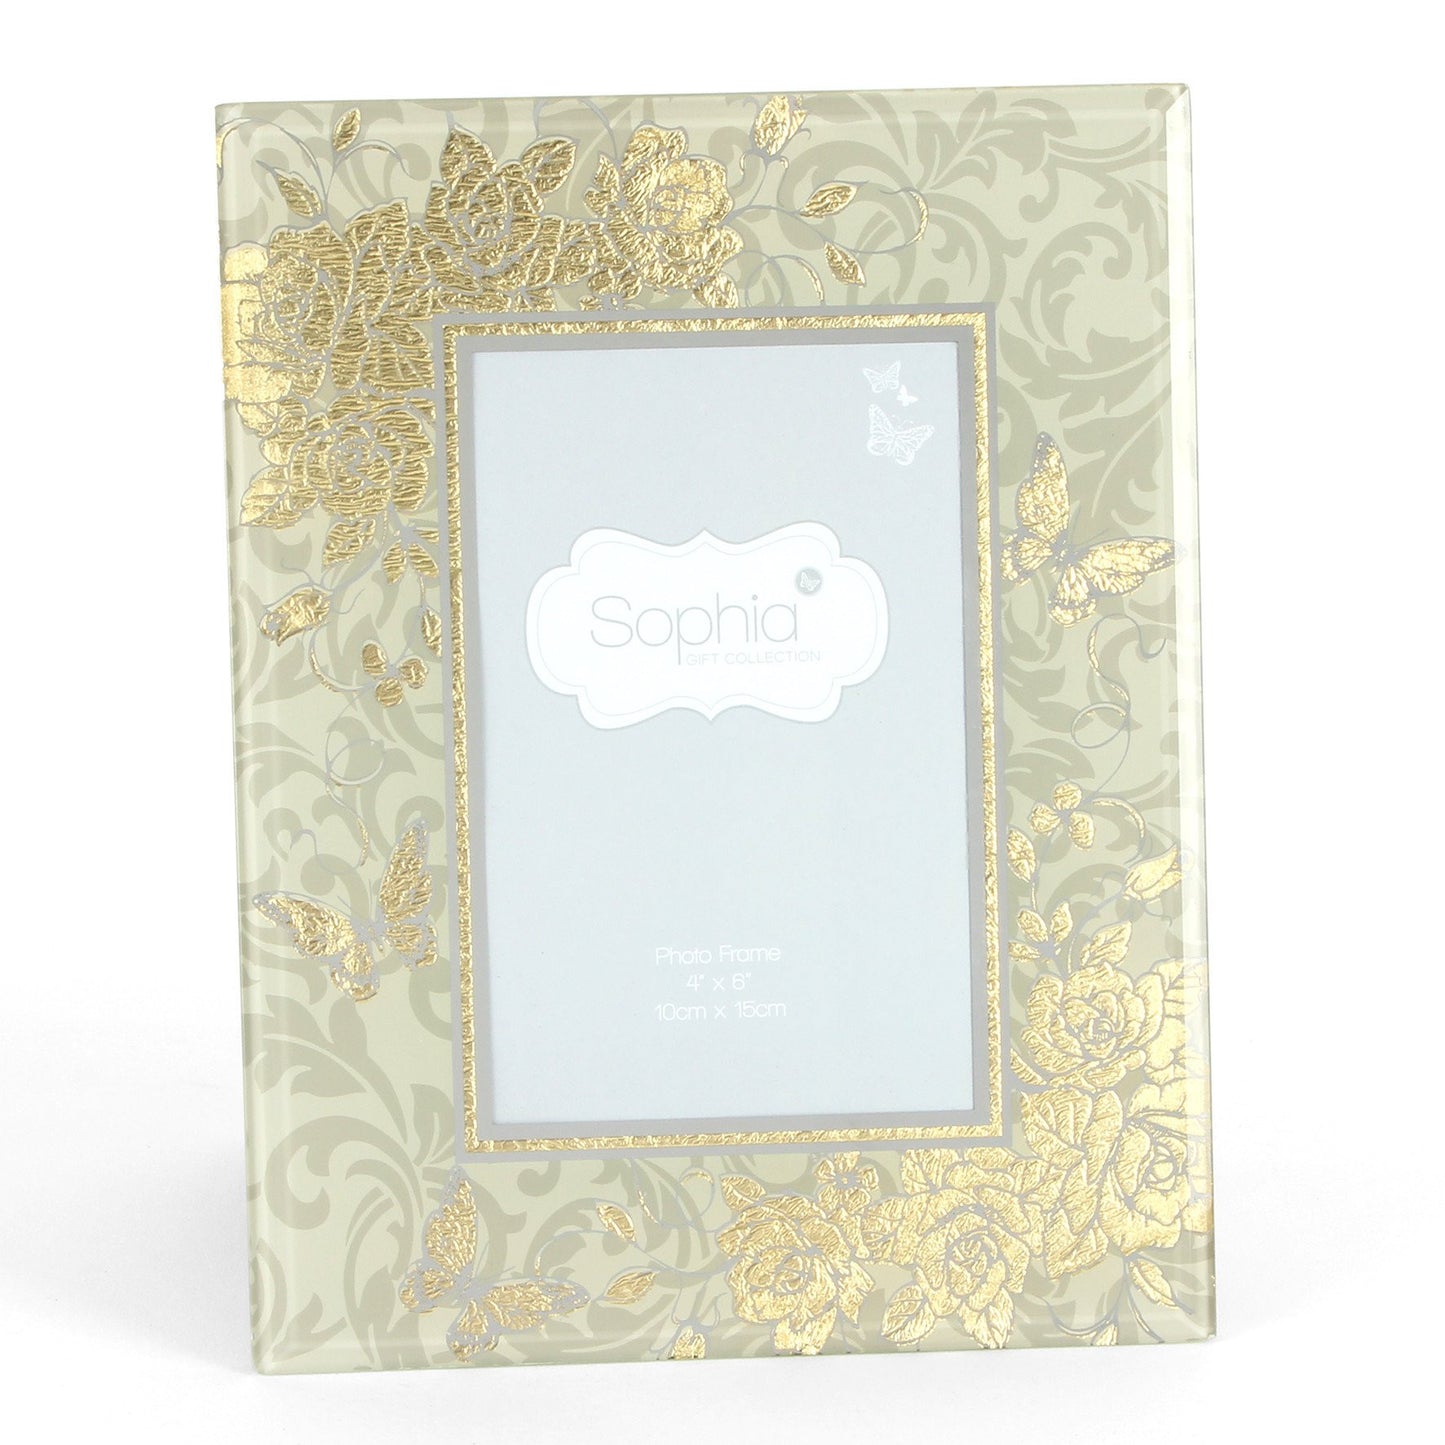 Sophia Gold Rose Collection Photo Frame 4" x 6"